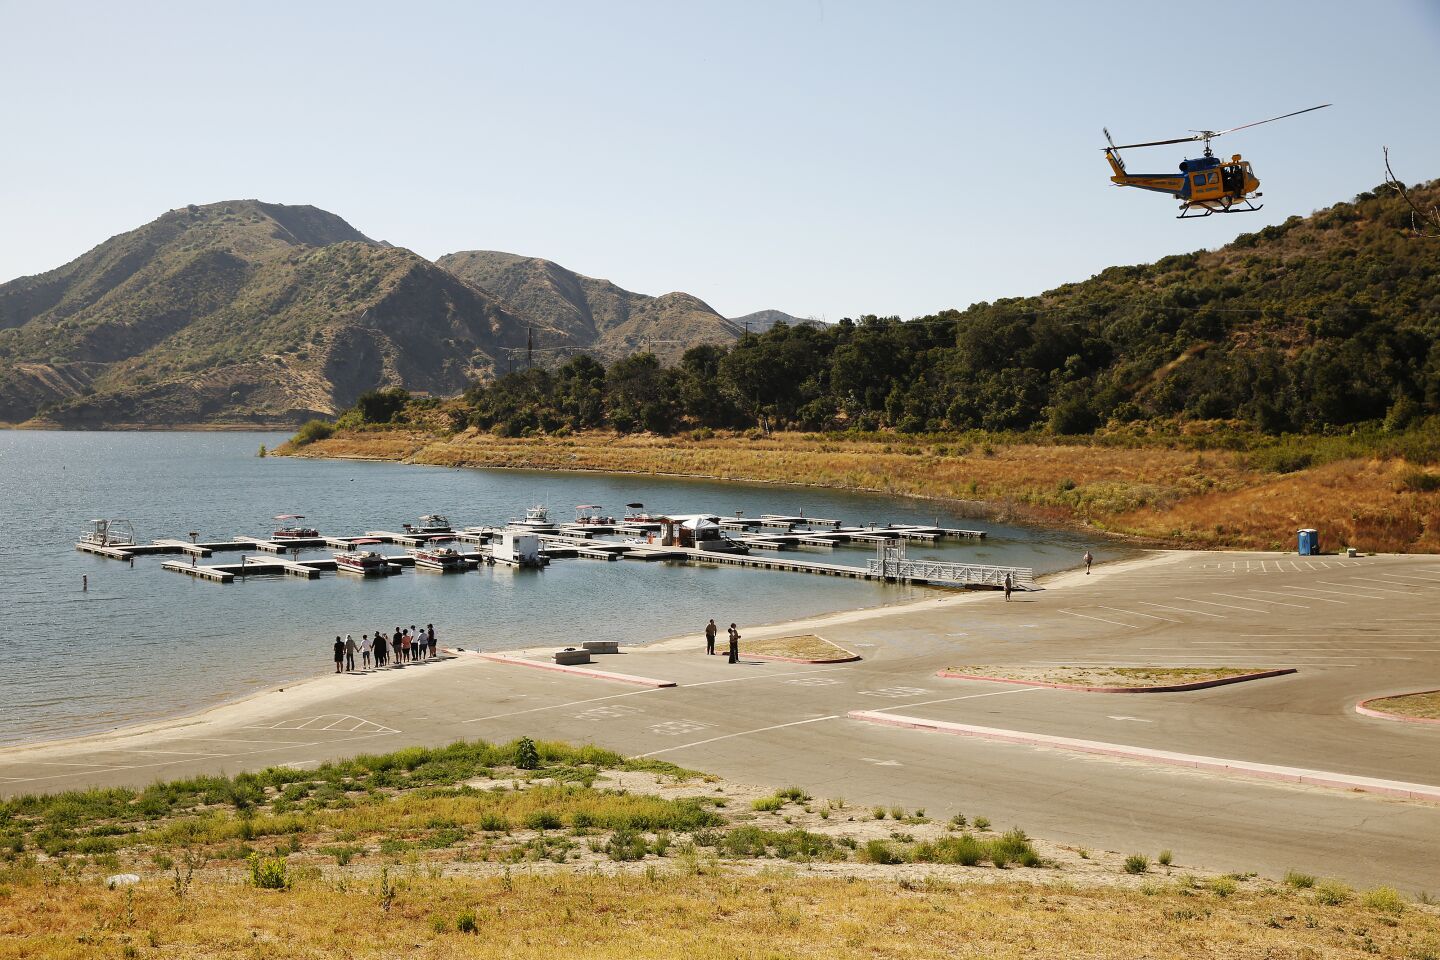 Cast members from the TV show "Glee" and friends held hands and shouted "Say her name: Naya" as they gathered Monday at the Lake Piru boat launch.